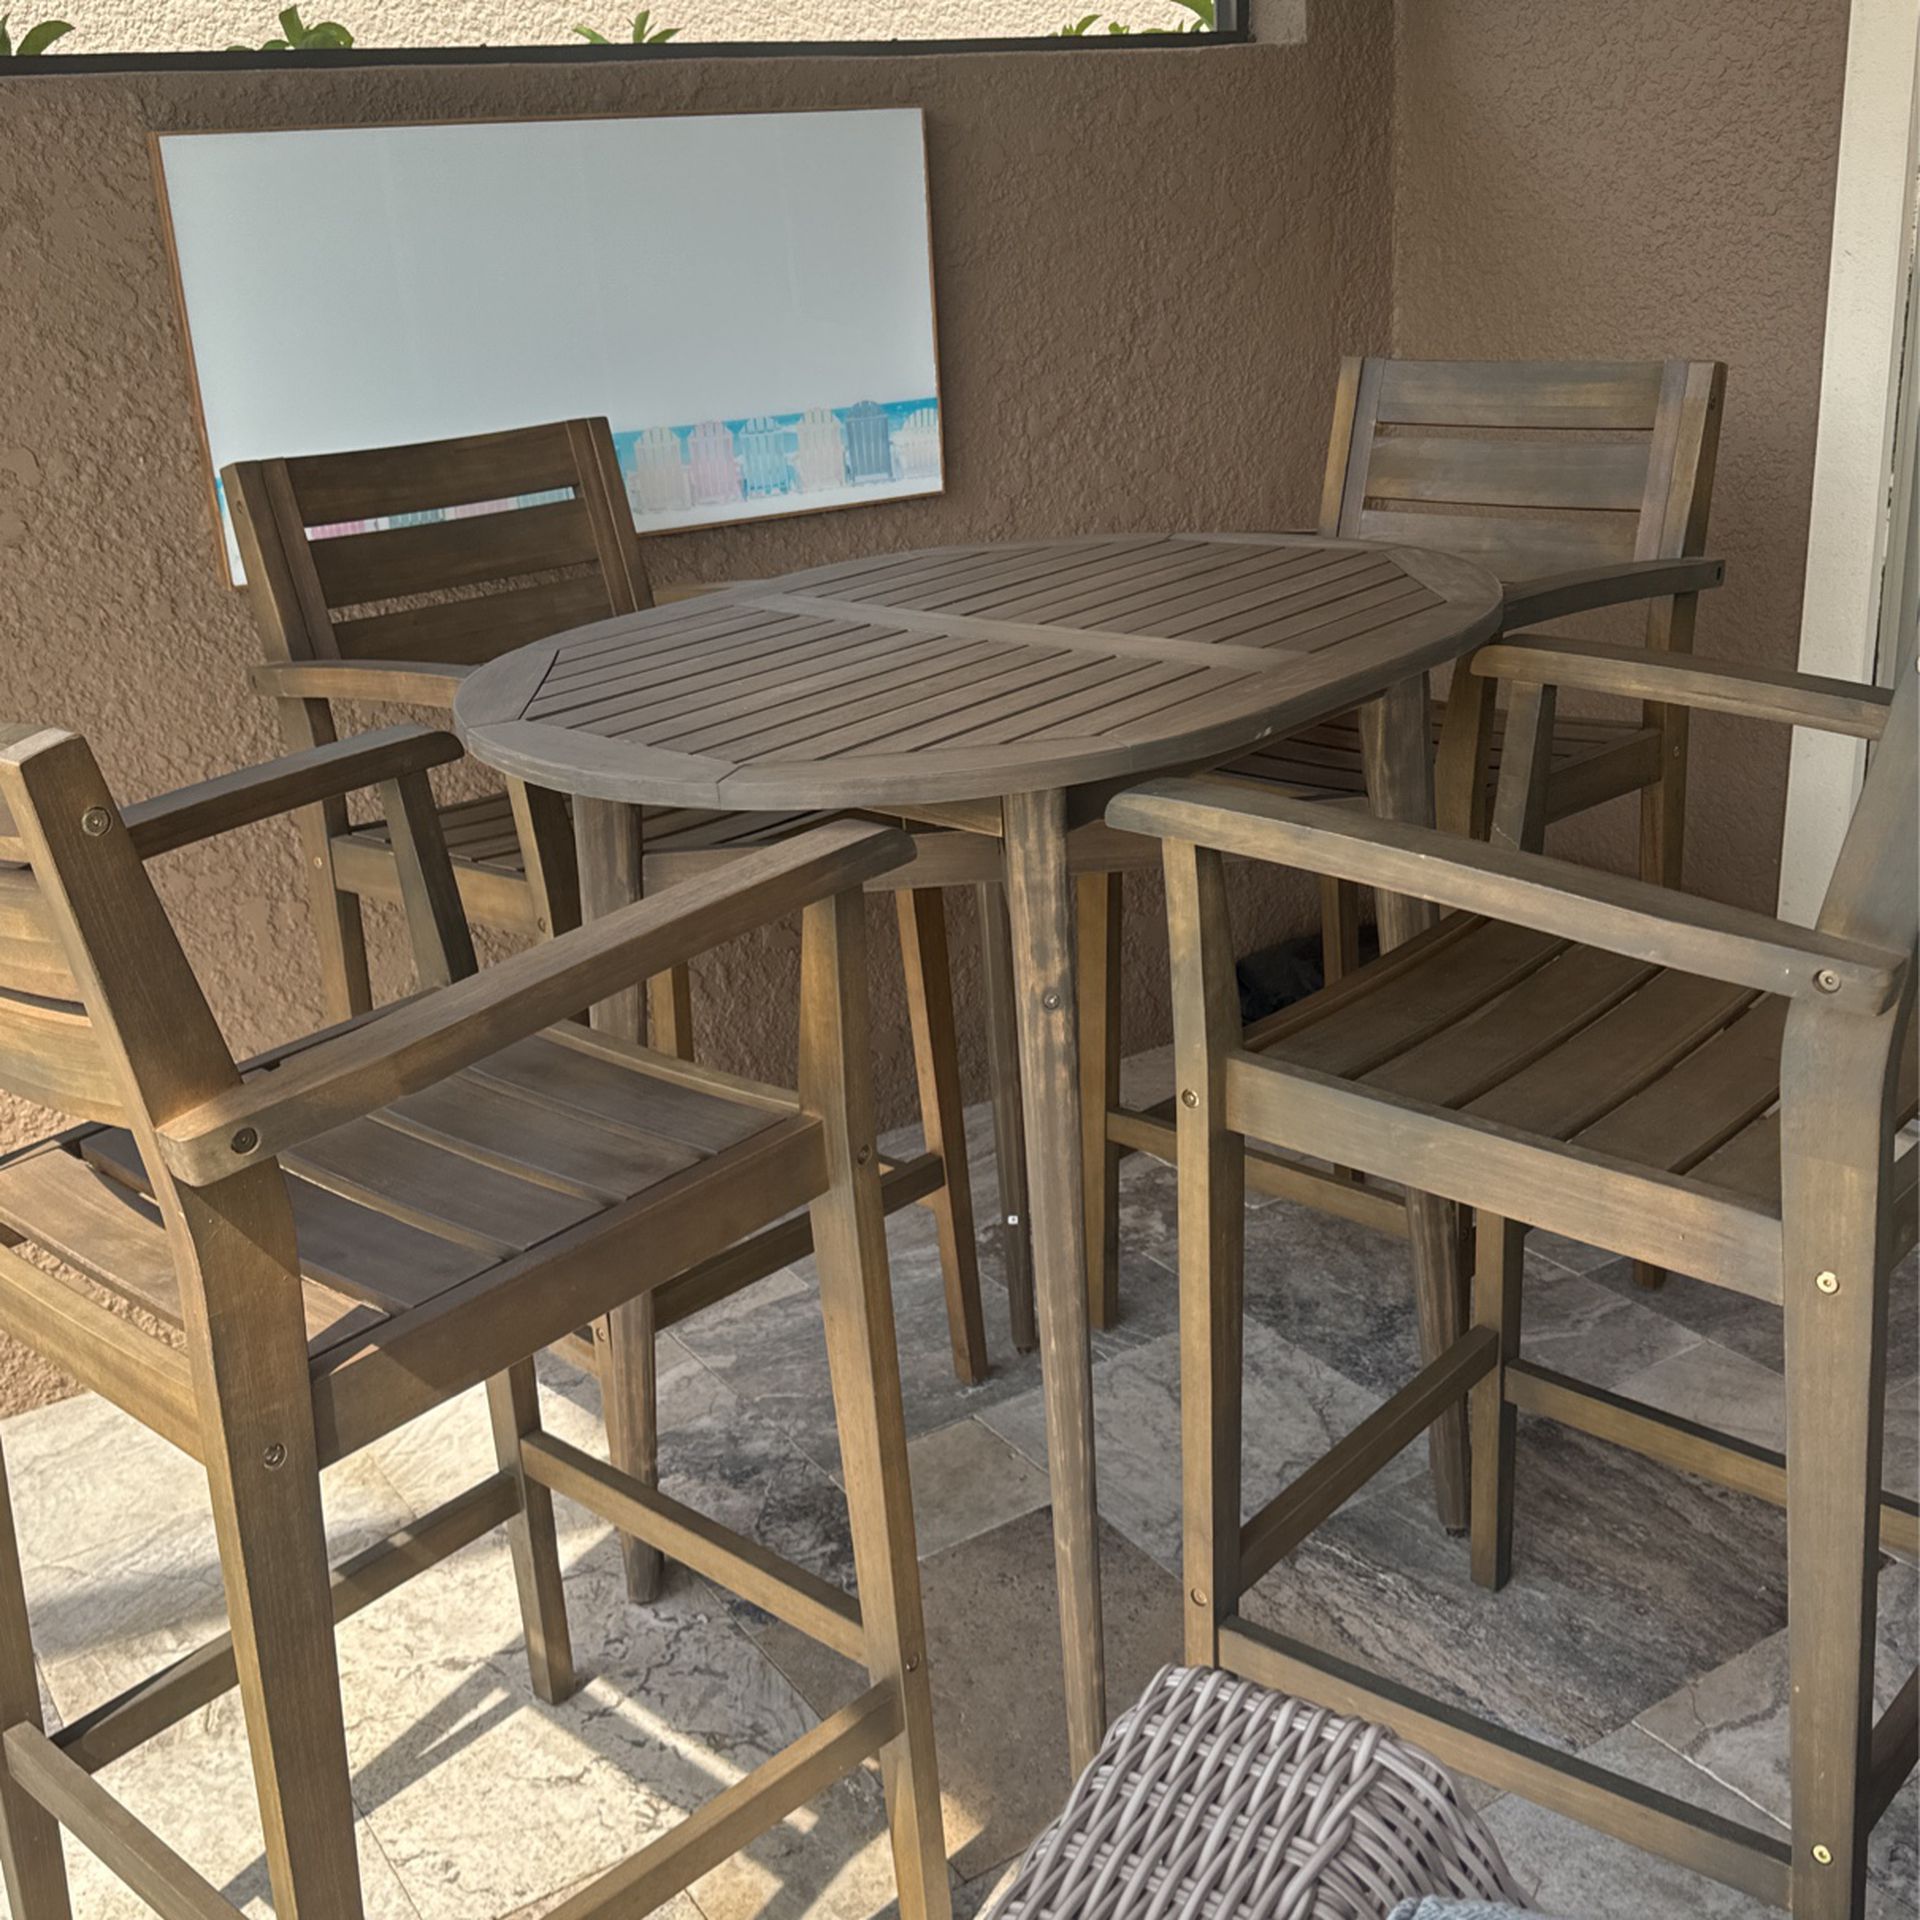 Outdoor high top table and 4 chairs